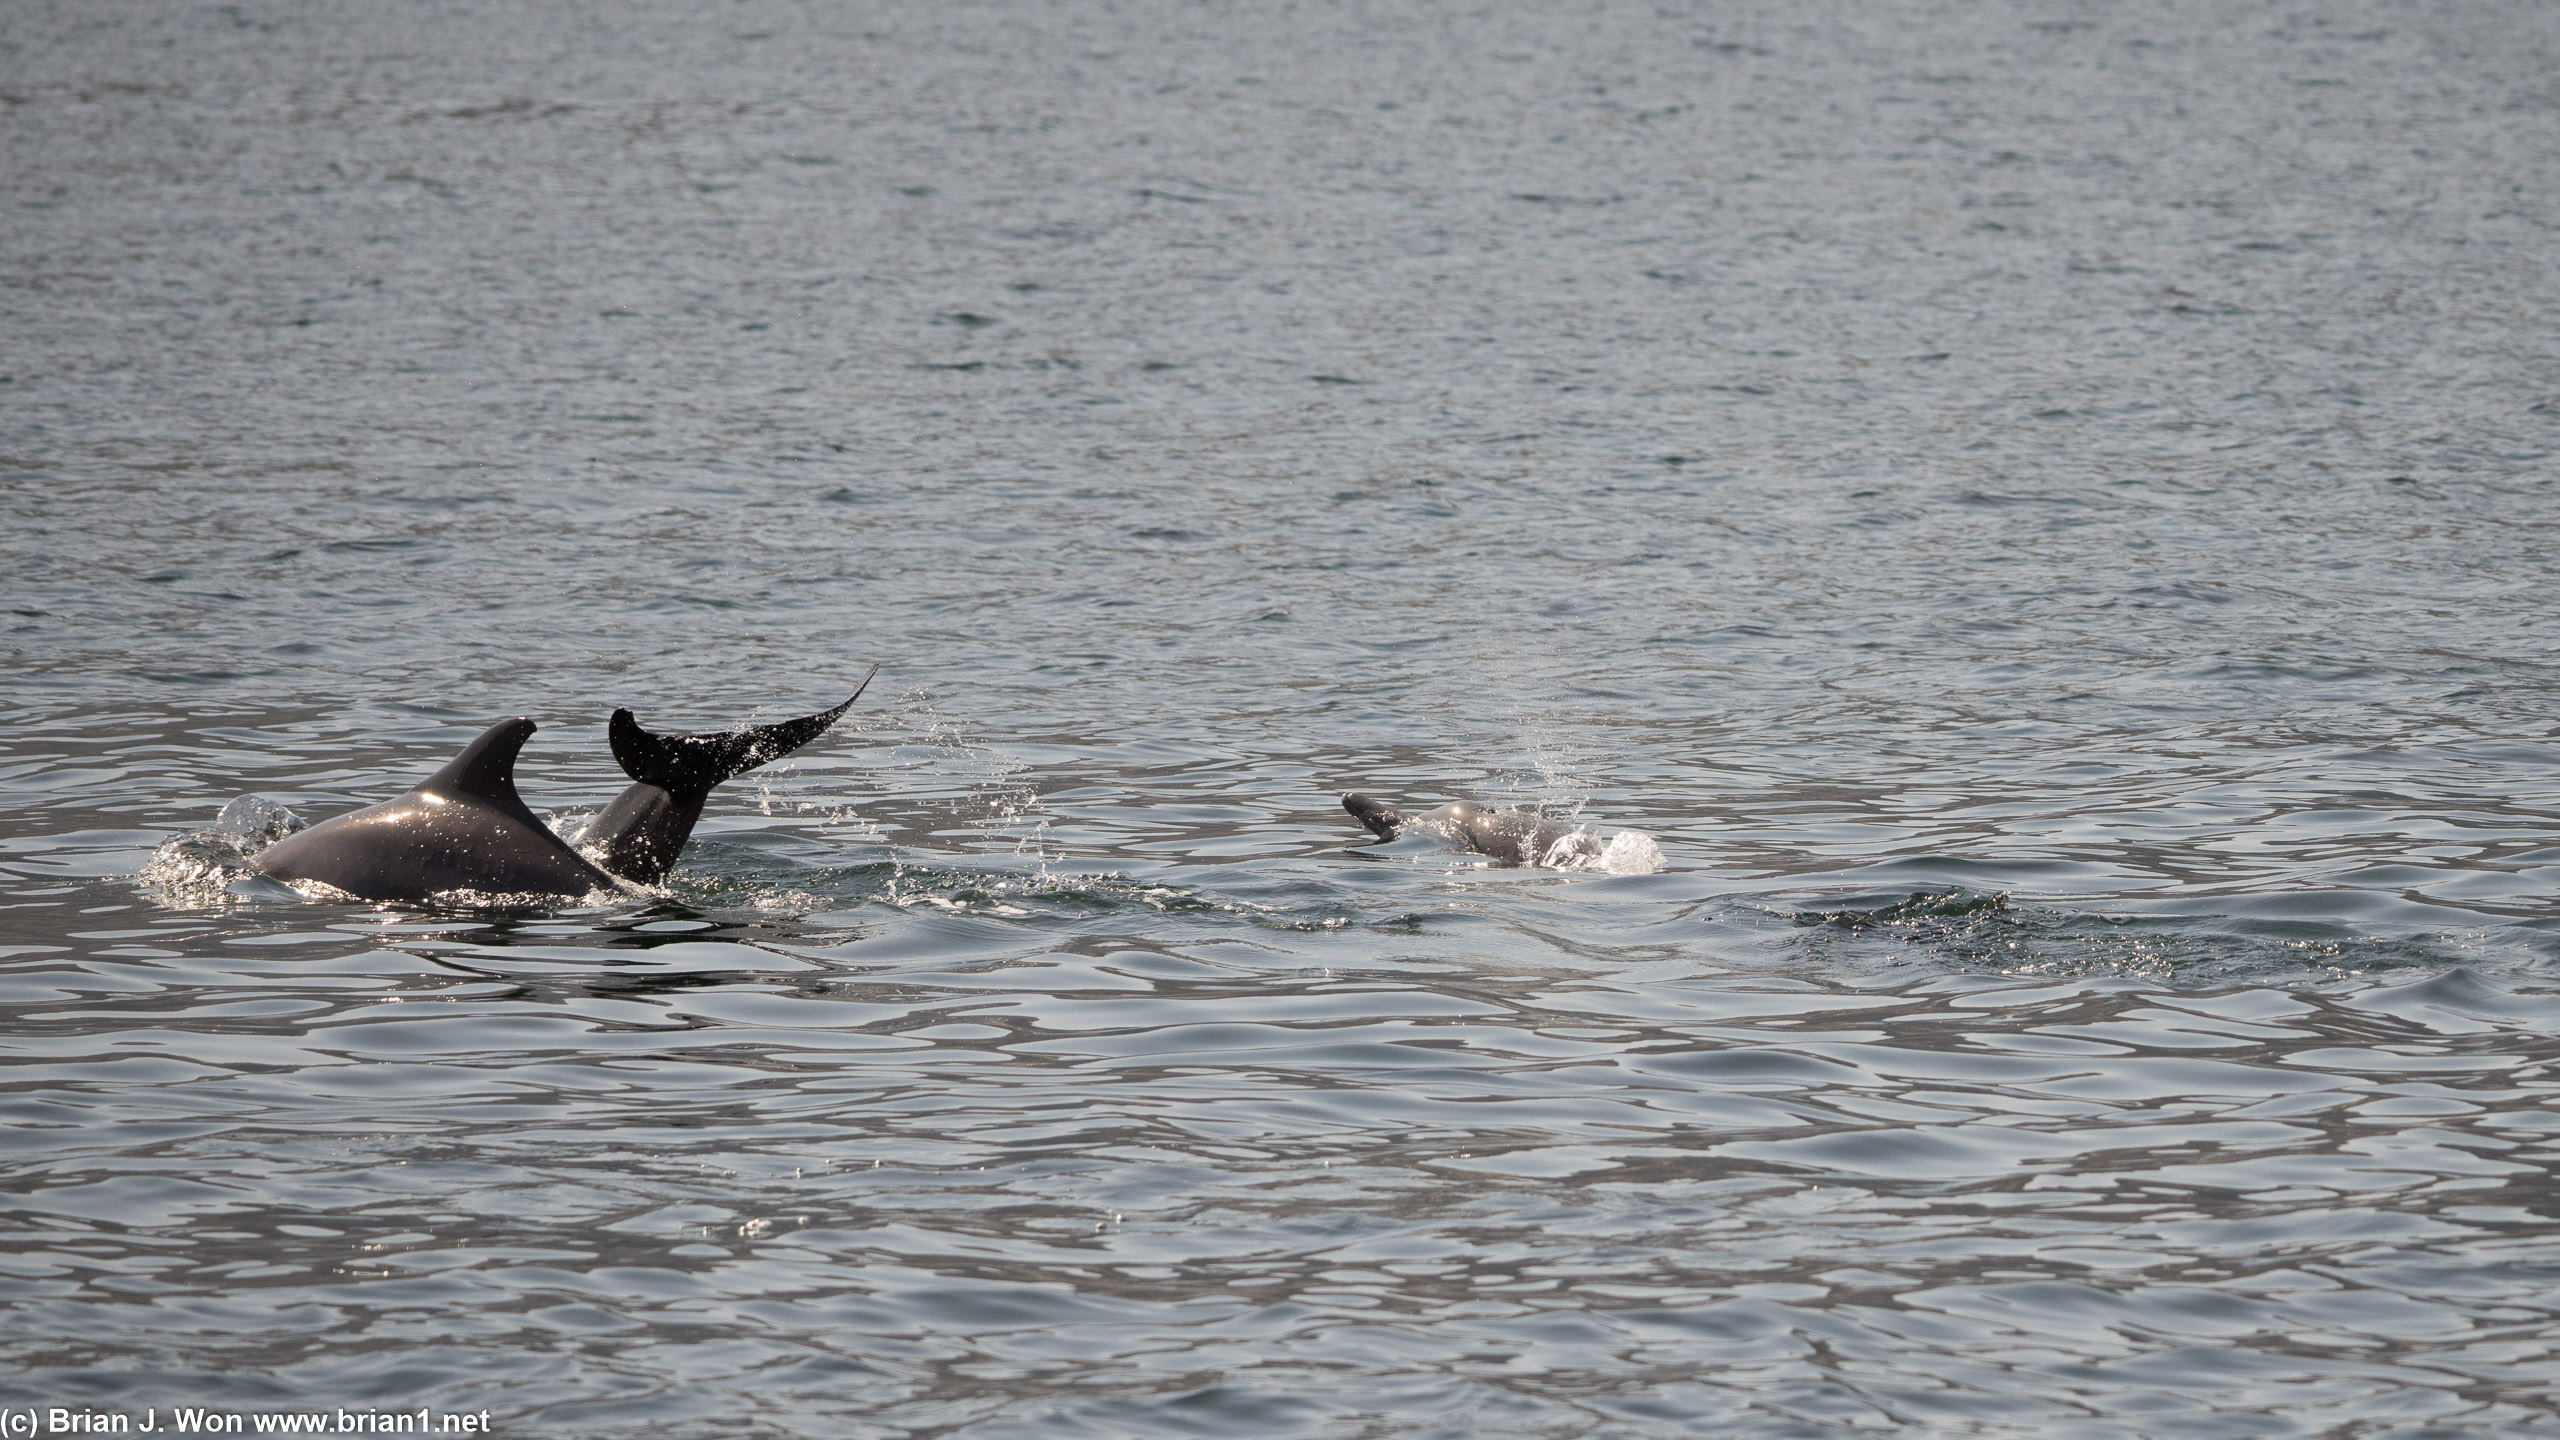 More dolphins.